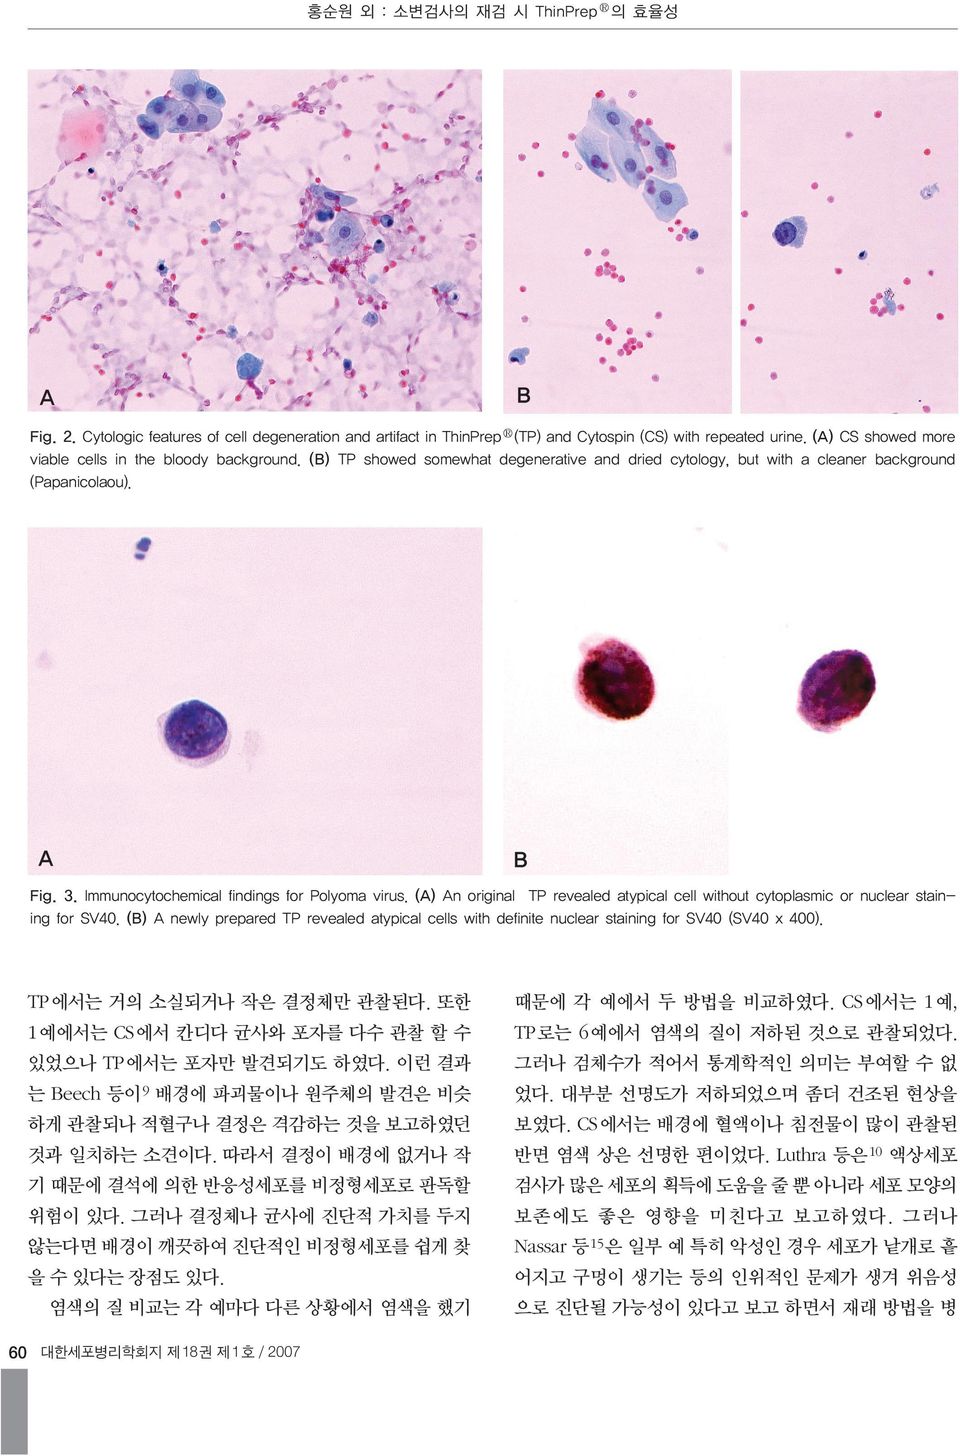 Immunocytochemical findings for Polyoma virus. (A) An original TP revealed atypical cell without cytoplasmic or nuclear staining for SV40.